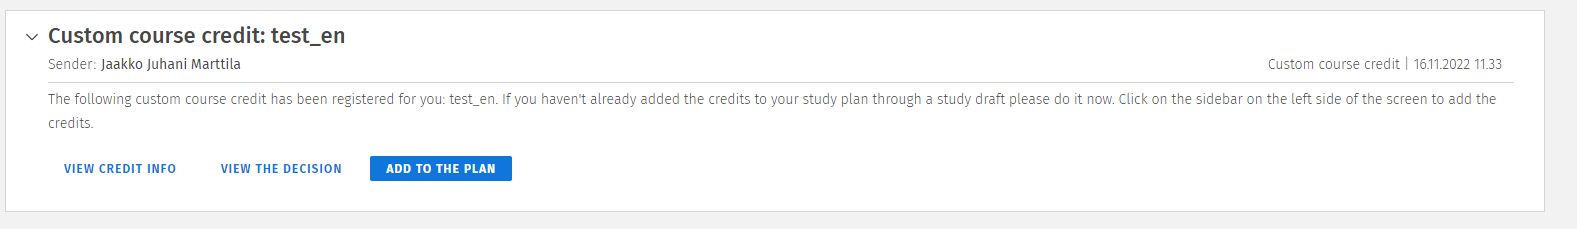 If you applied for inclusion or a custom course credit without creating a study draft first, the decision on your application will contain a button that says ‘Add to the plan’.